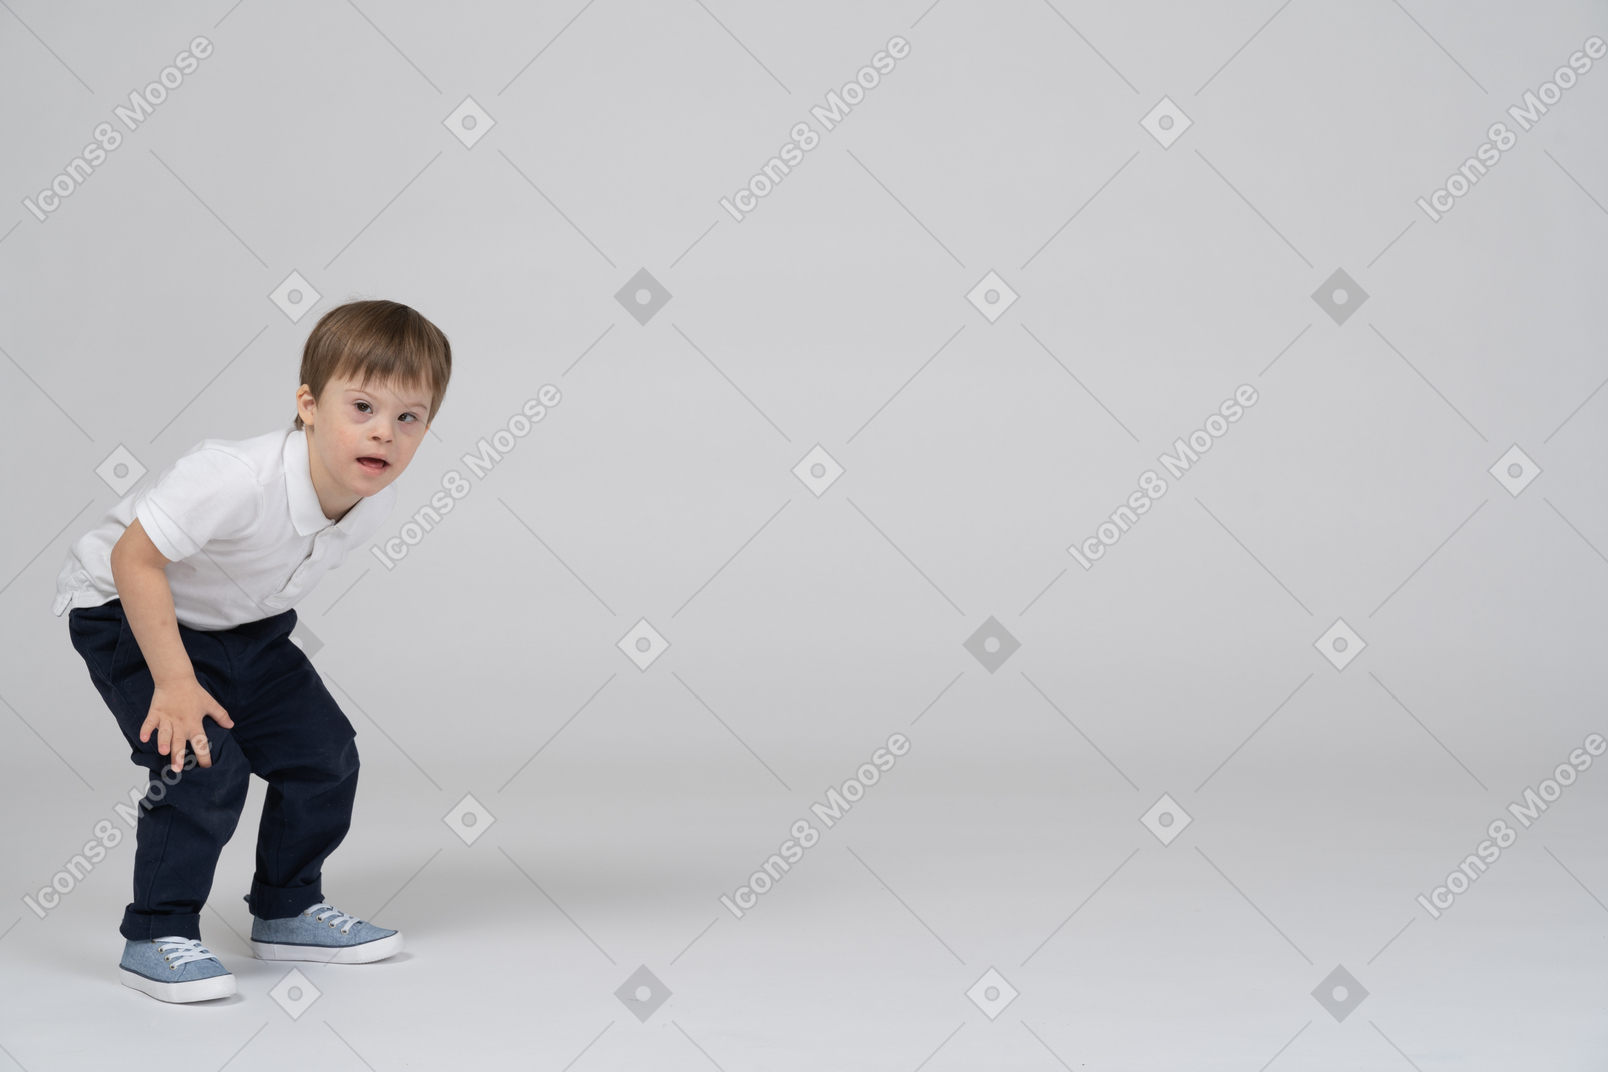 Surprised little boy standing with bent knees